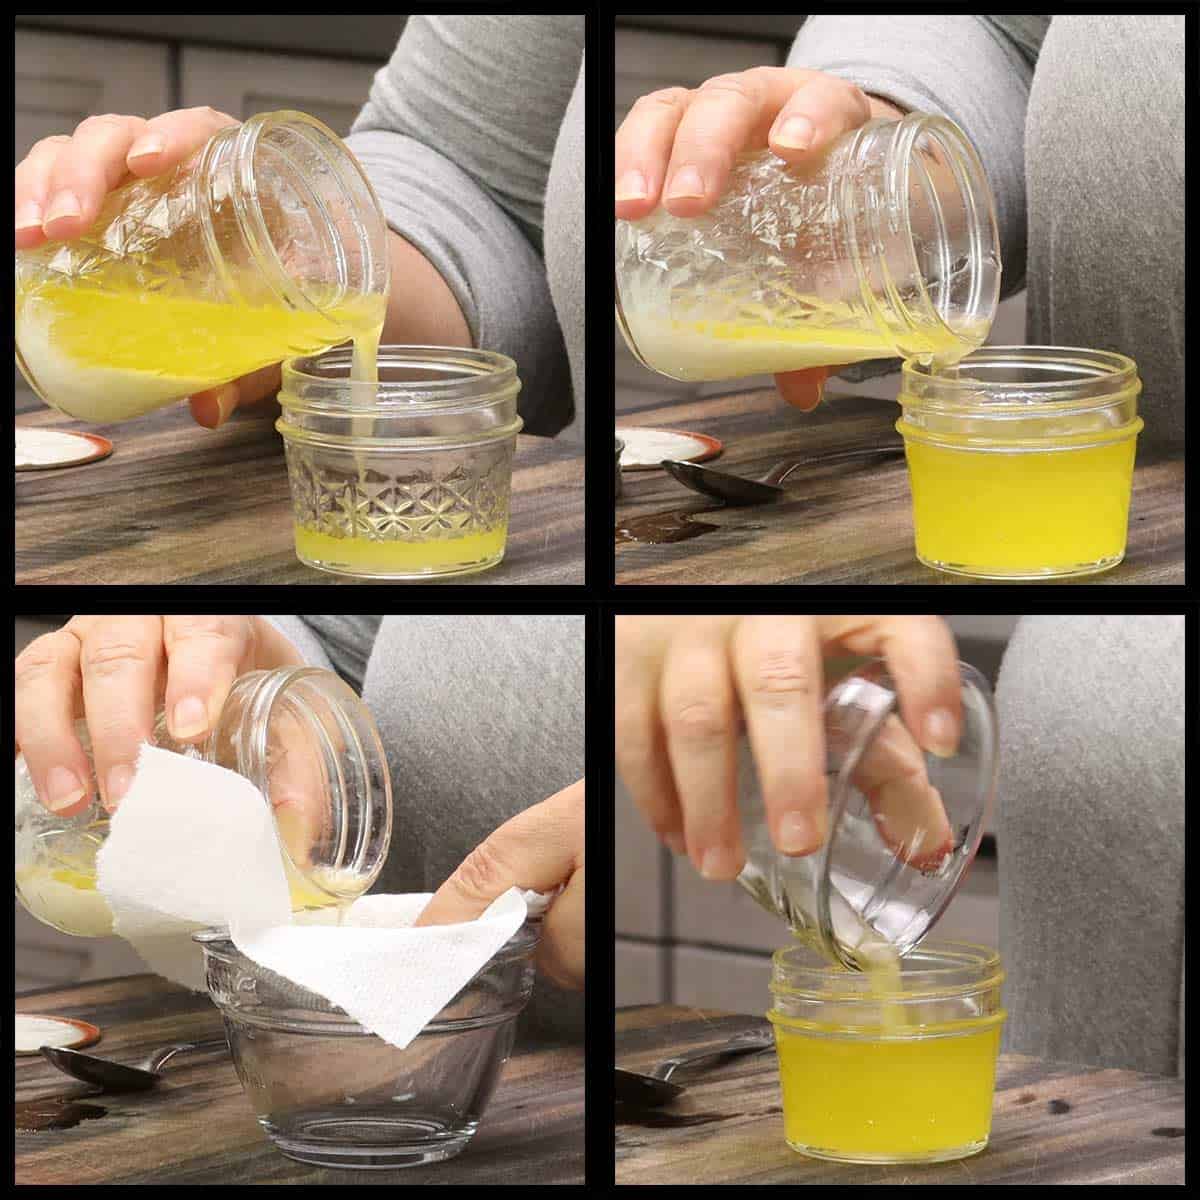 pouring off the butterfat into a separate jar and then straining the rest into a small bowl and then pouring into the jar of clarified butter. 